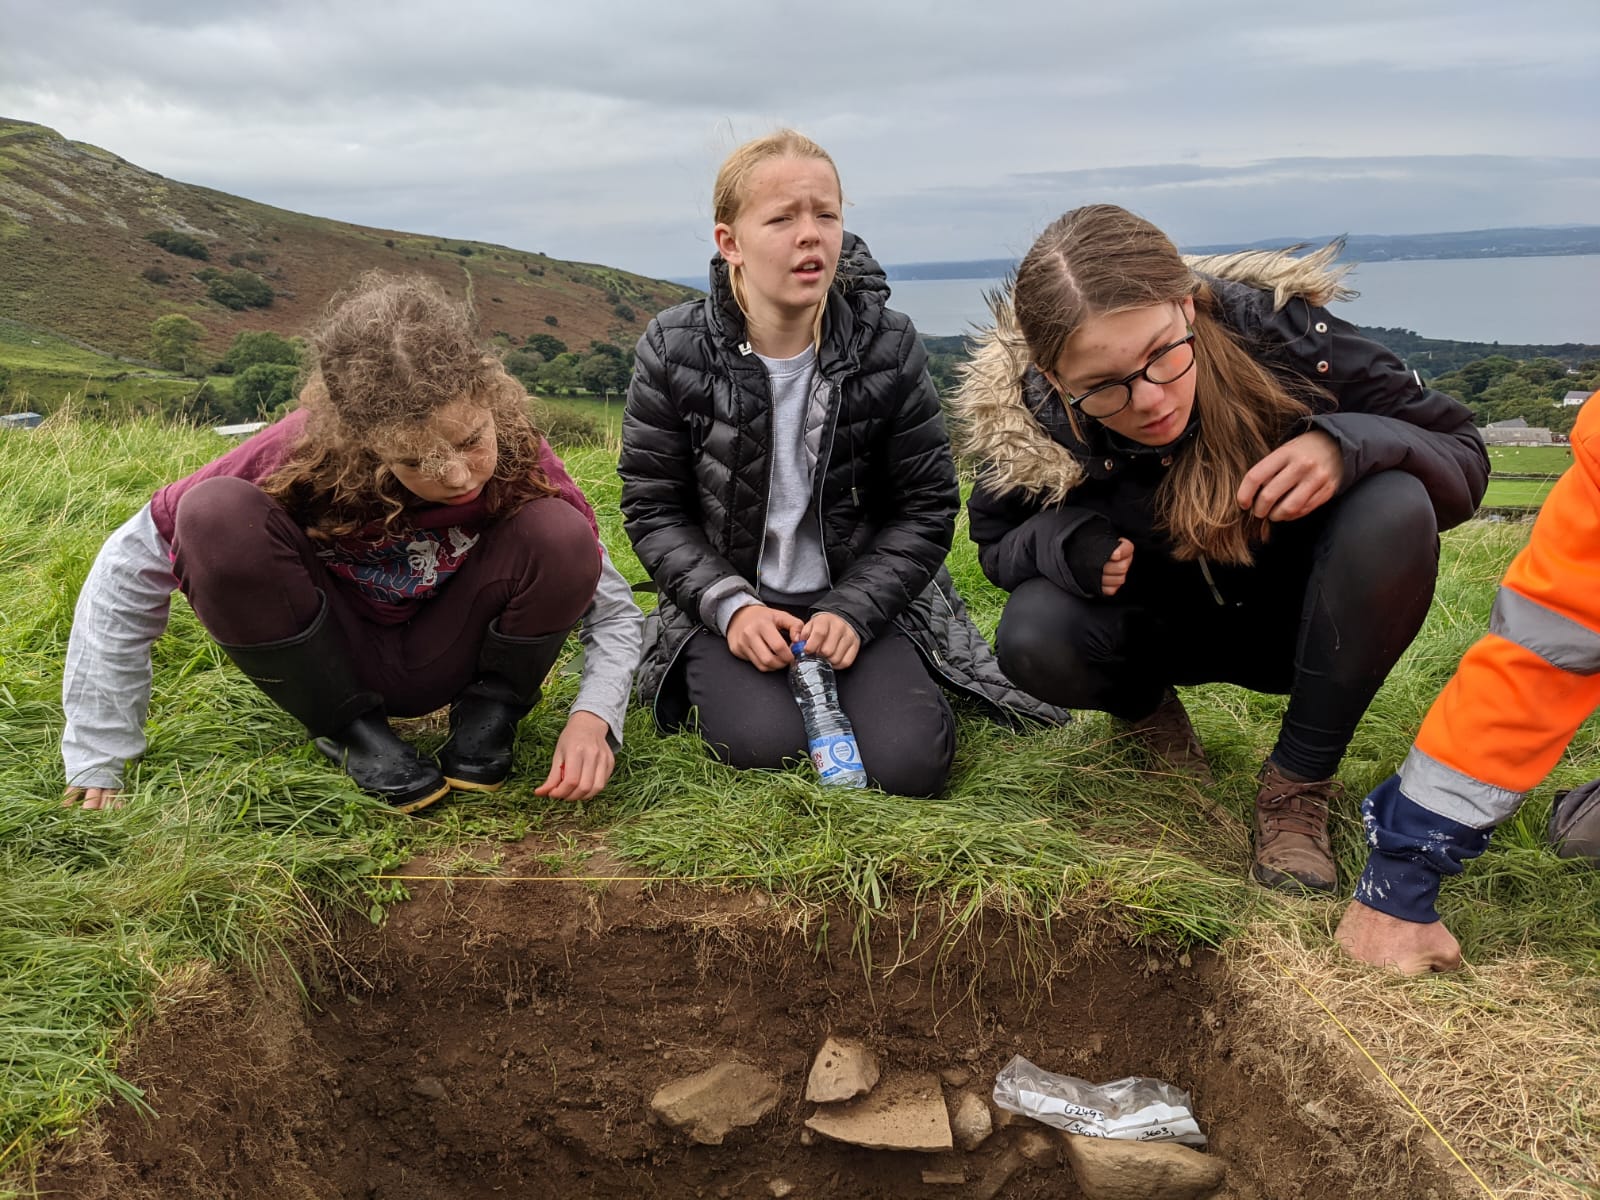 Volunteers help make new discoveries at Carneddau Neolithic Axe Site